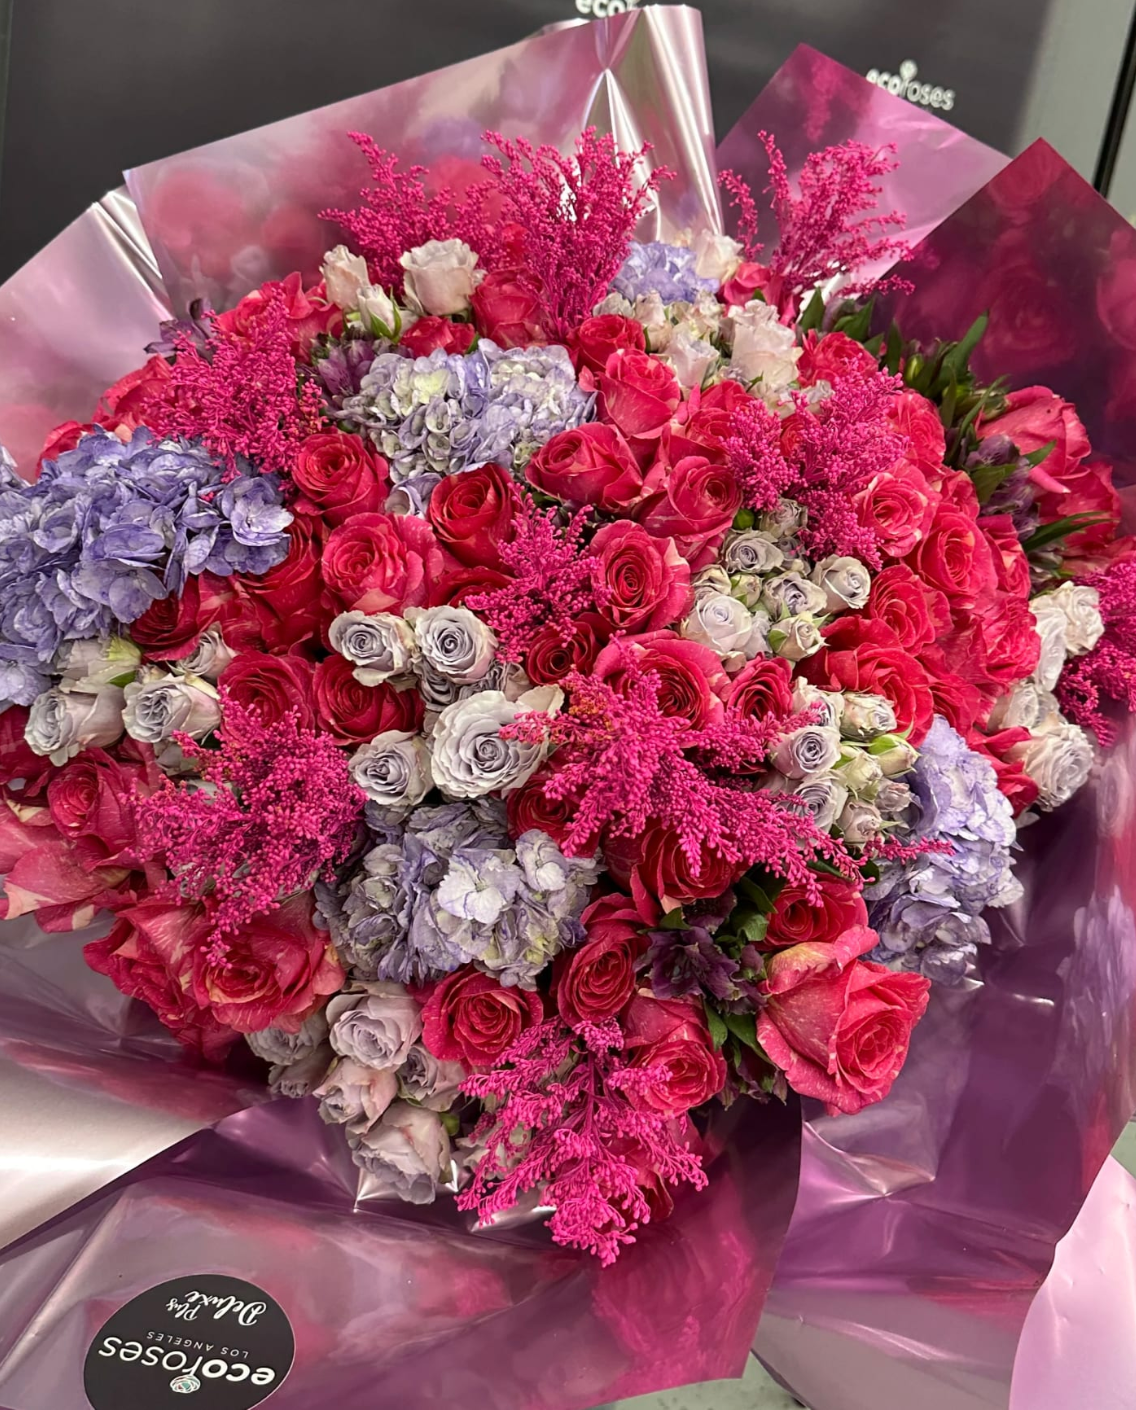  Bubblegum Beauty deluxe bouquet features hot pink and purple blooms, adding a pop of color and fun to your special event. 